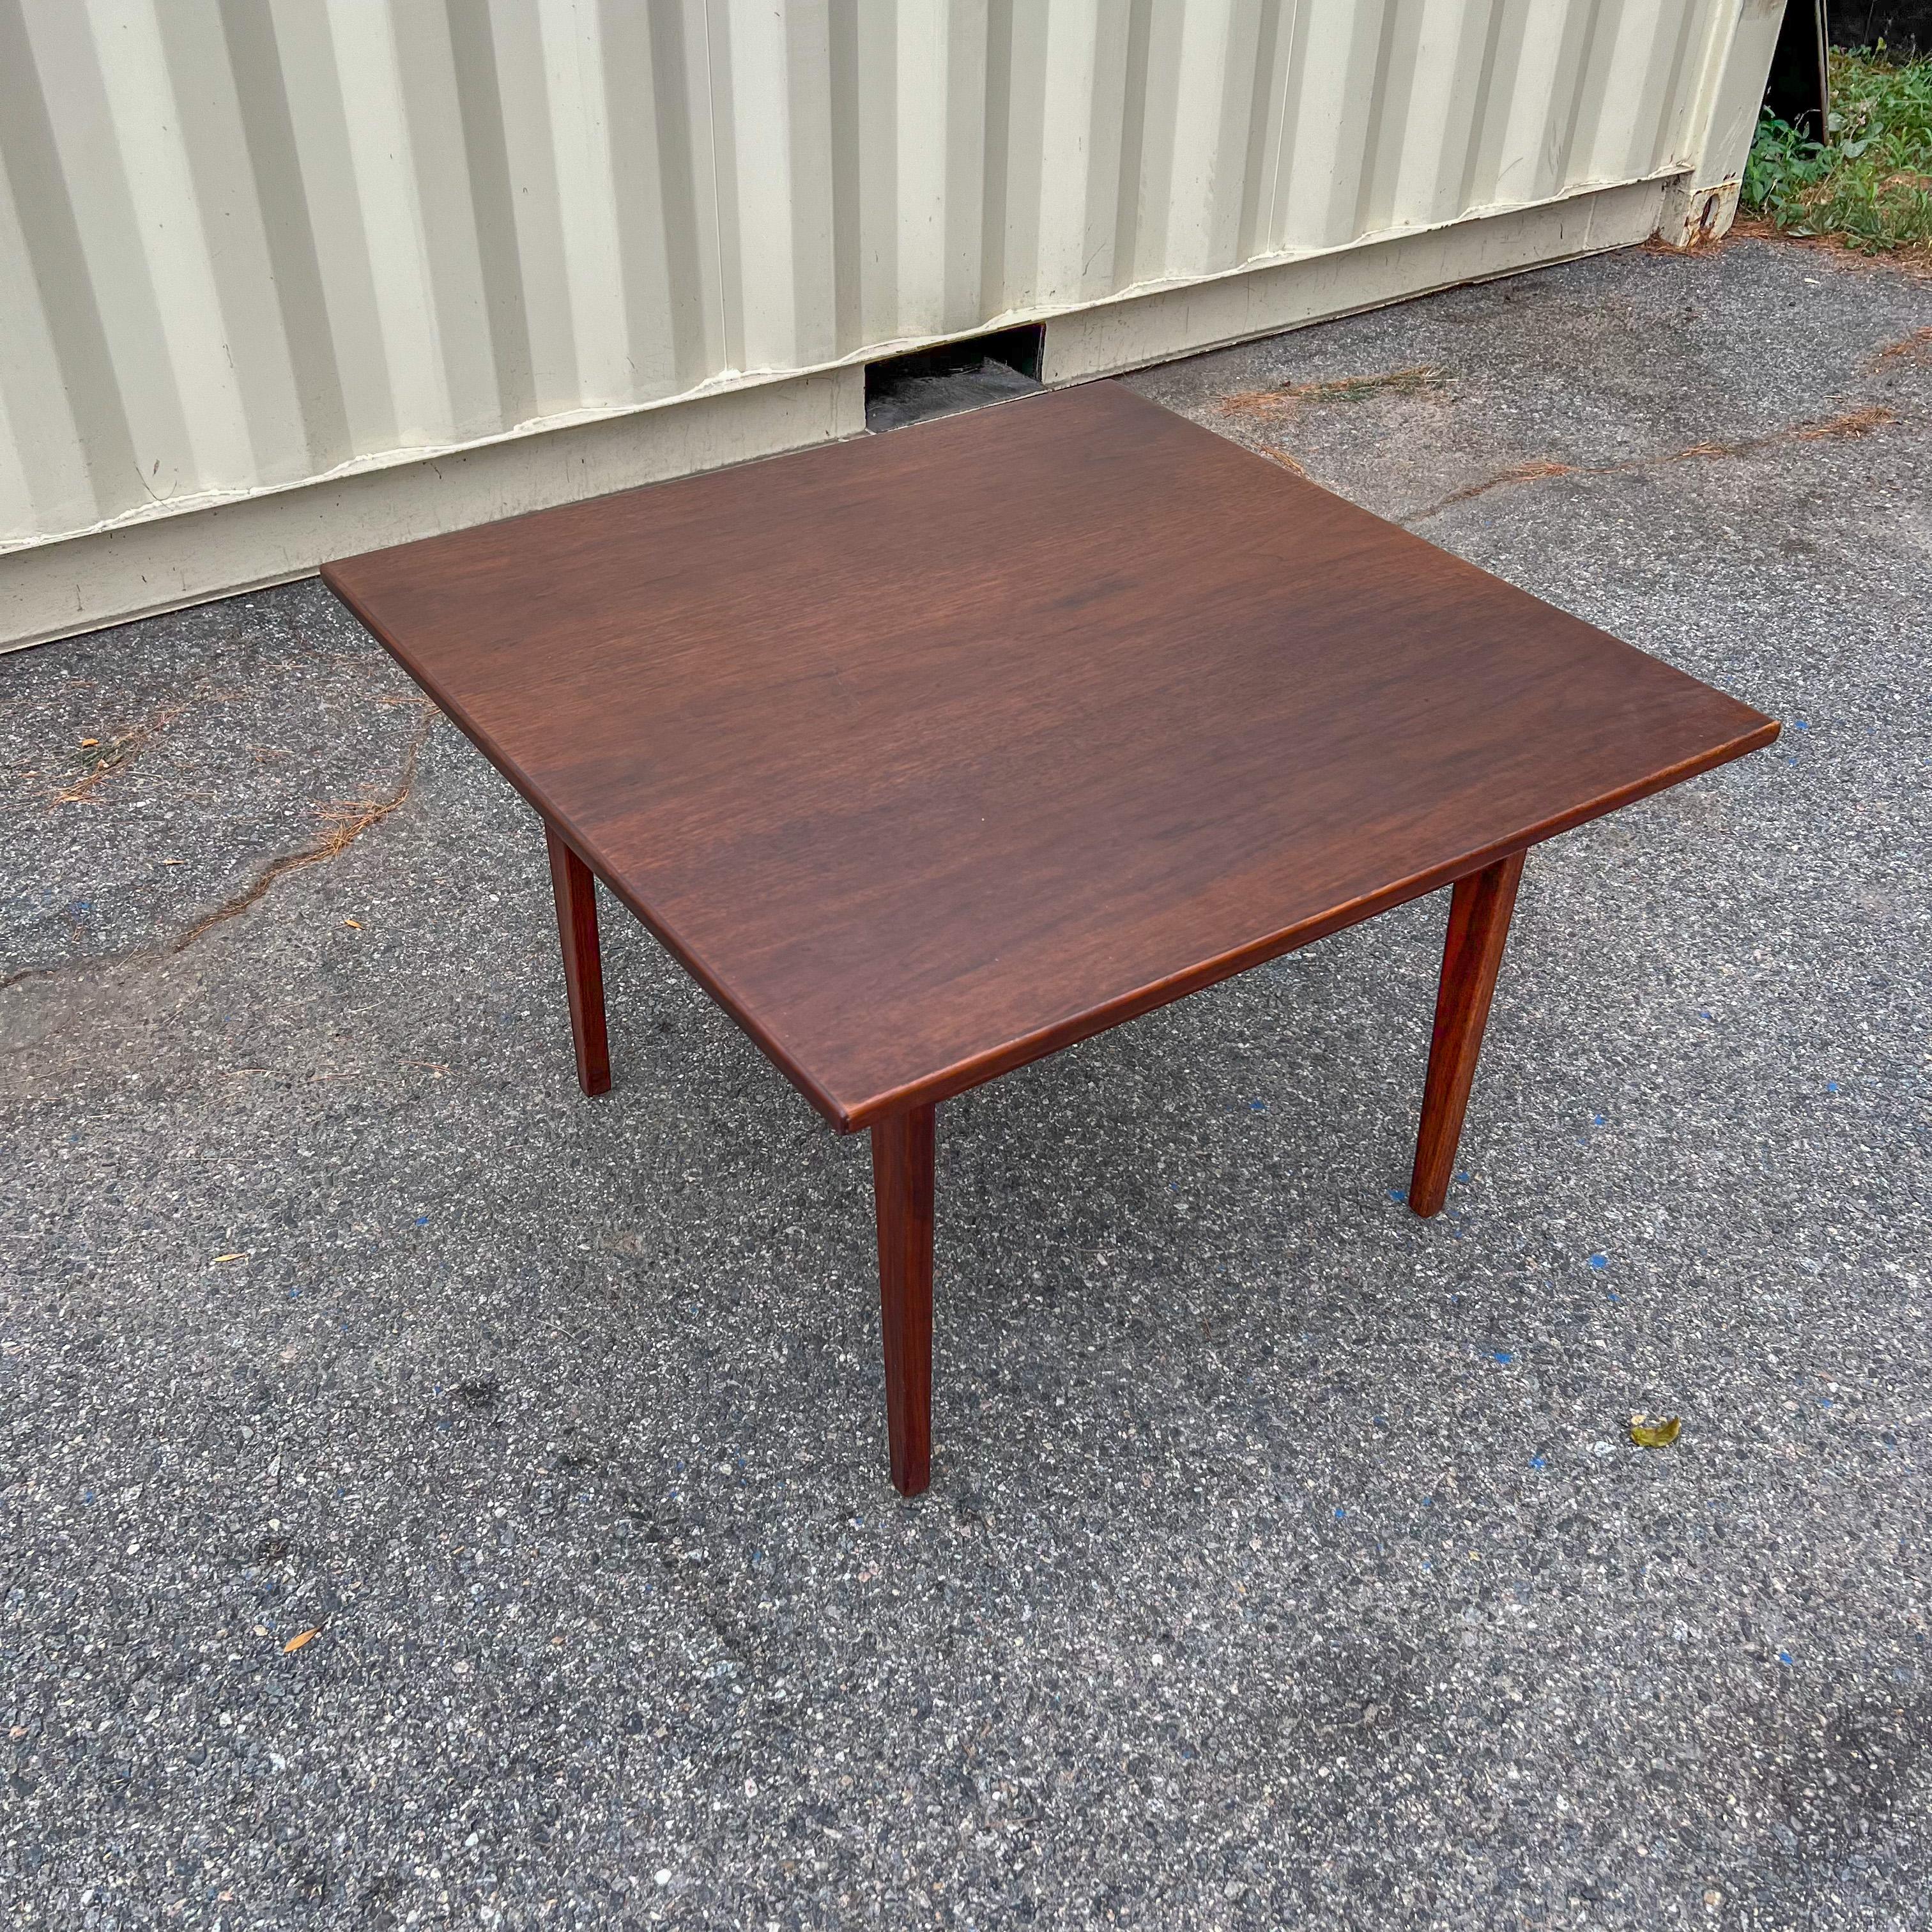 Mid-Century Modern walnut end table with sculpted legs designed by Jens Risom (stamped).